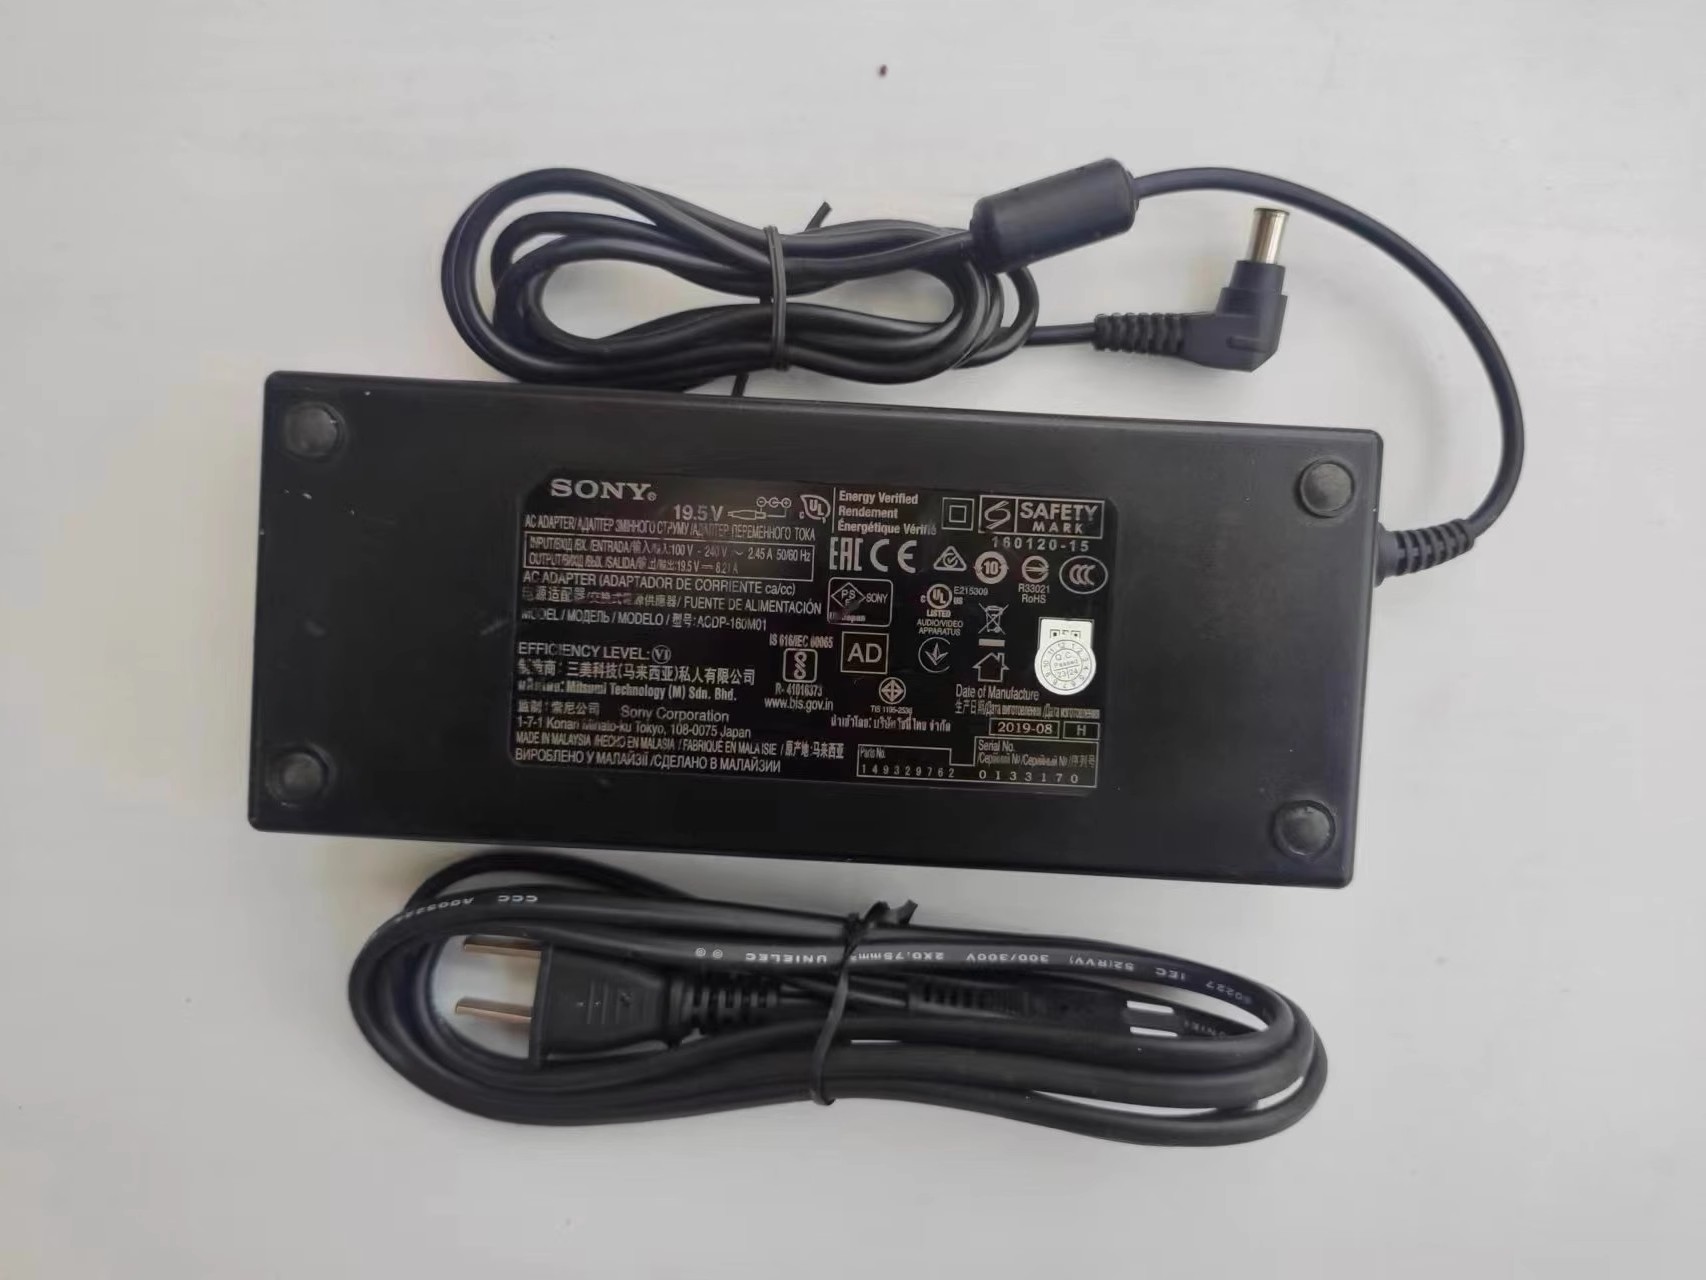 *Brand NEW*19.5V 8.21A 160W AC/DC AC ADAPTER SONY ACDP-160M01 POWER Supply